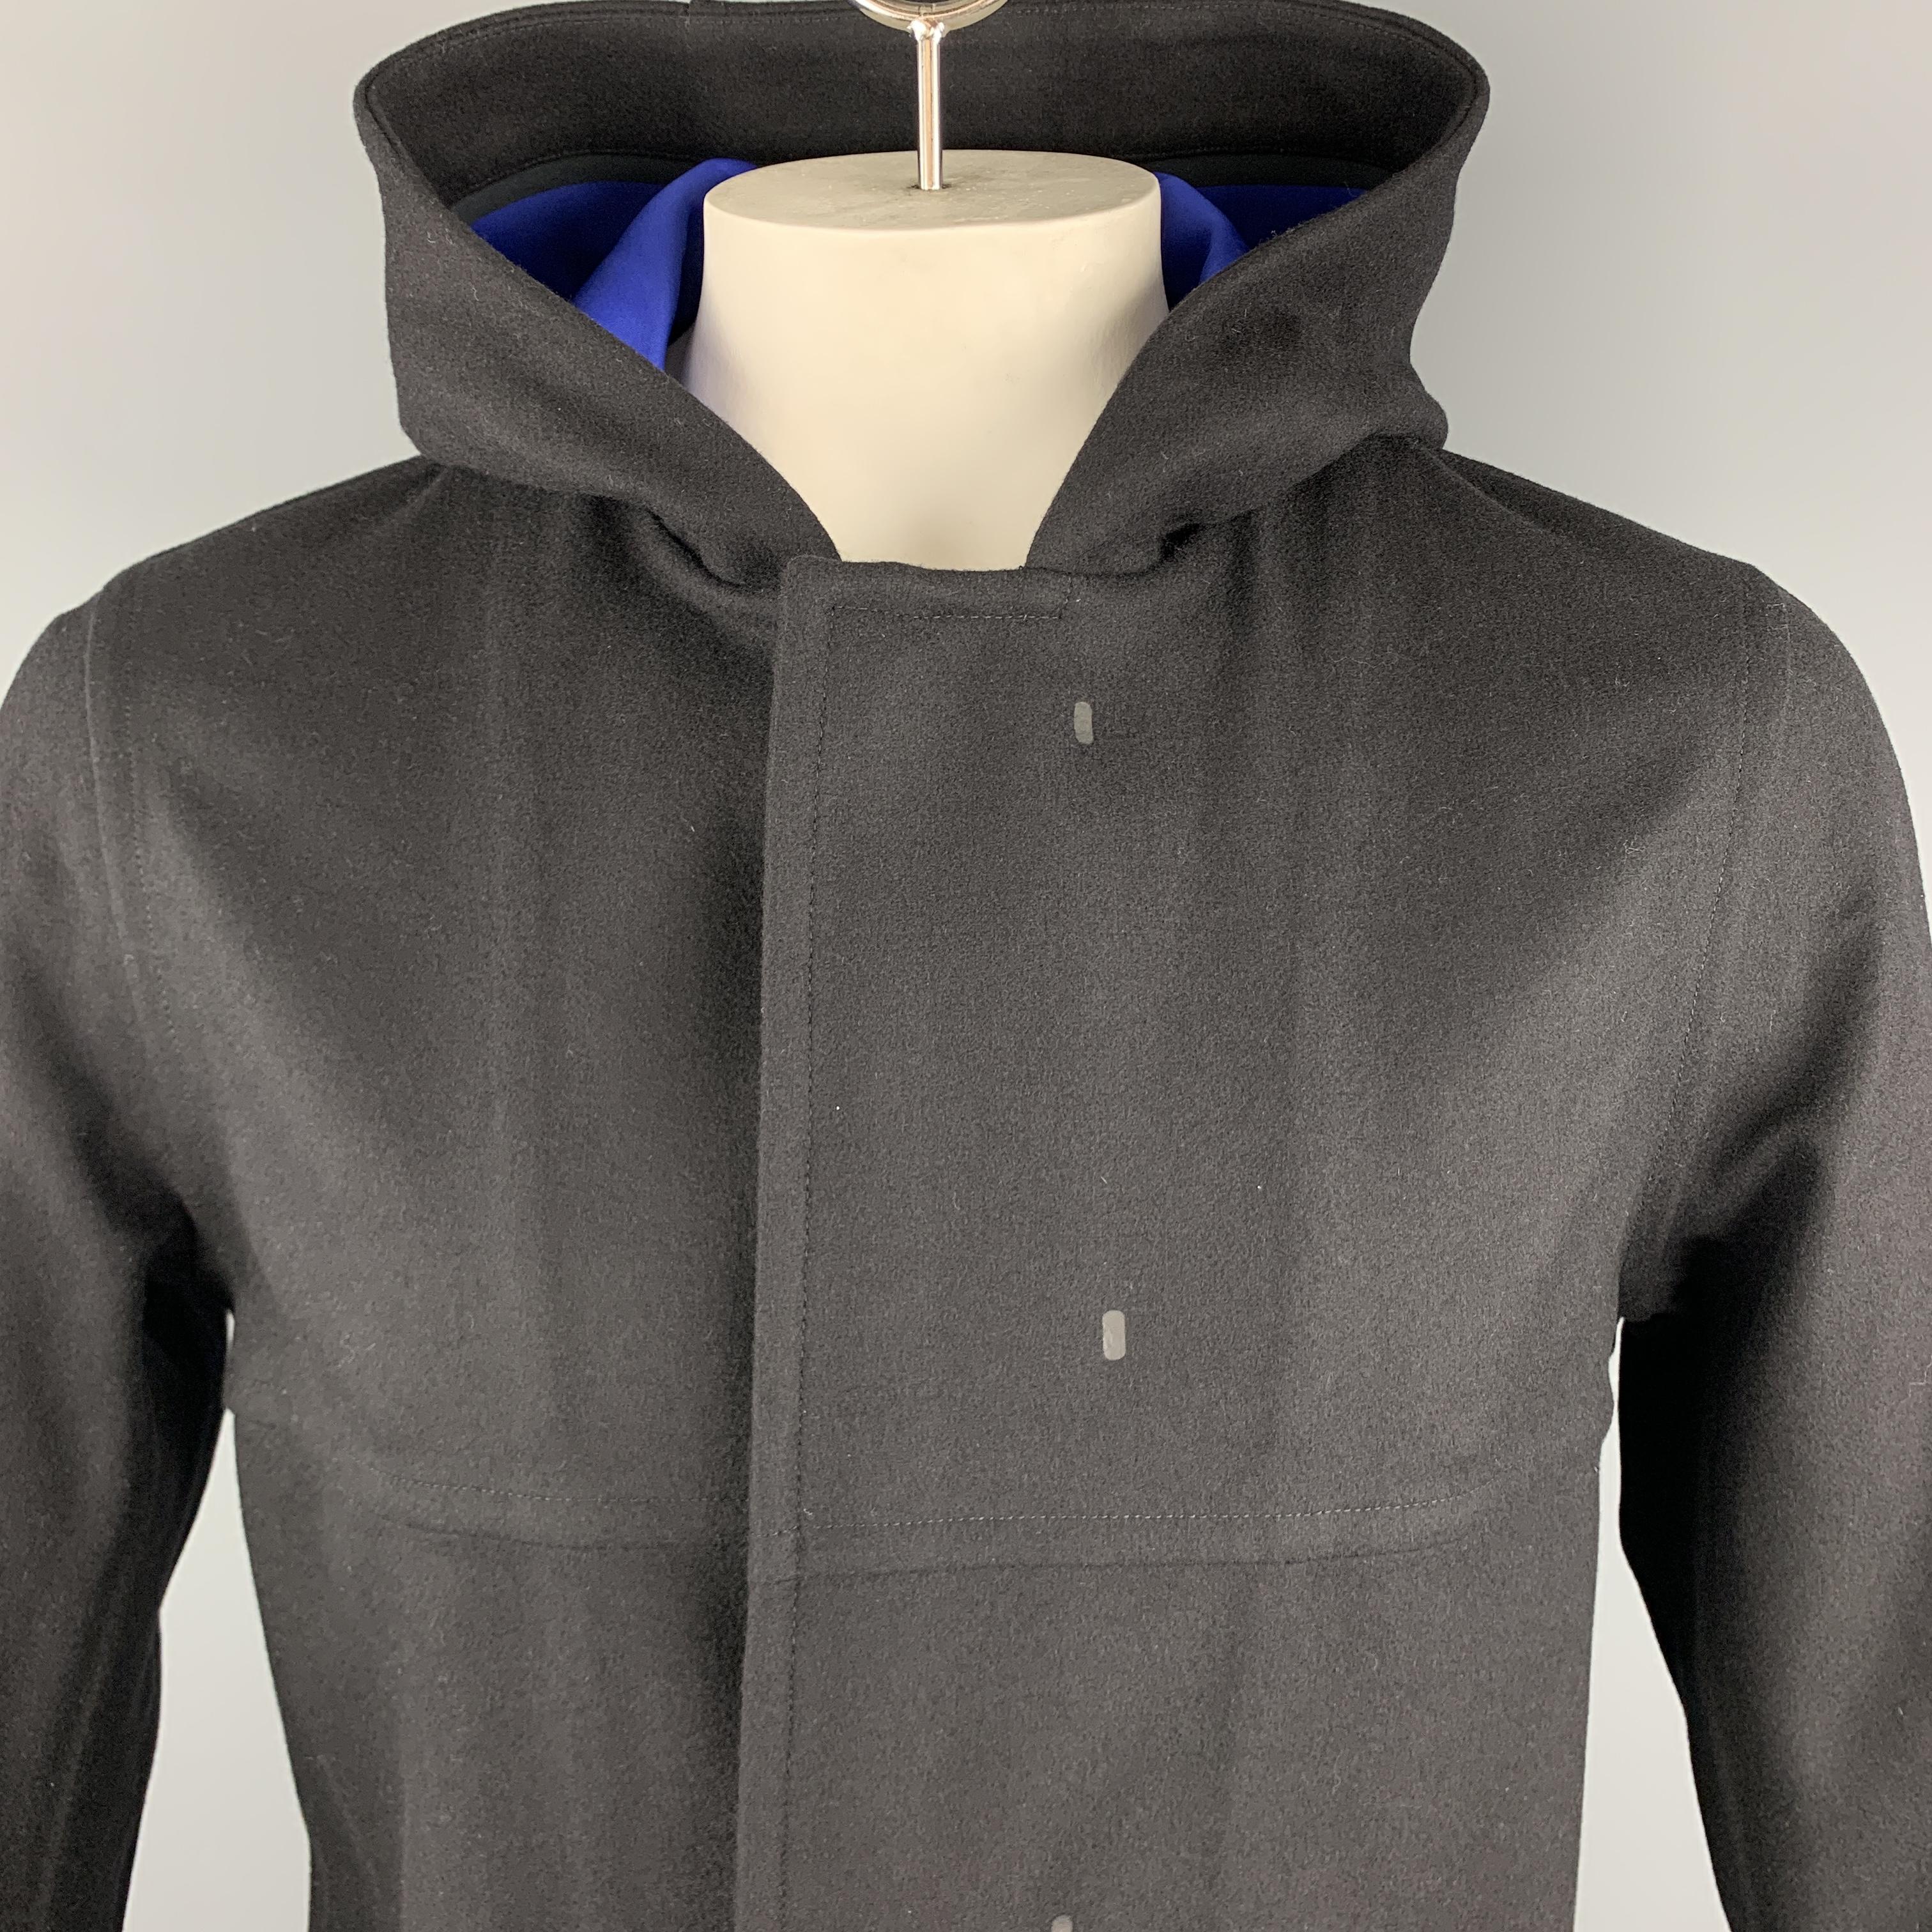 THEORY Coat comes in a solid black wool blend, with a hood, 5 hidden buttons at closure, single breasted, patch pockets, unbuttoned cuffs, unlined.

New with Tags.
Marked: M

Measurements:

Shoulder: 17.5 in. 
Chest: 44 in. 
Sleeve: 25.5 in.